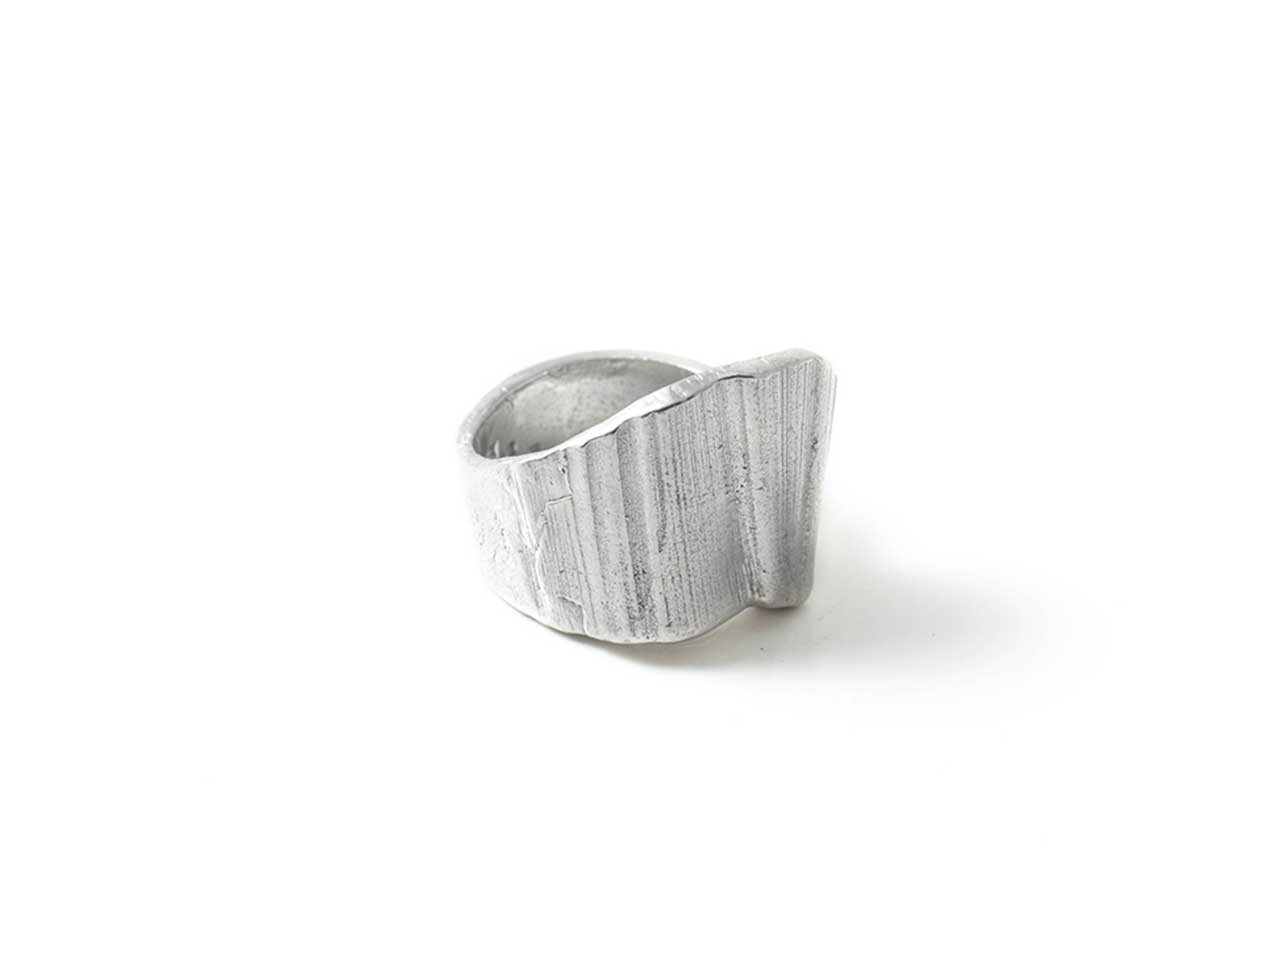 A silver jewellery ring from Canadian brand Anne-Marie Chagnon..